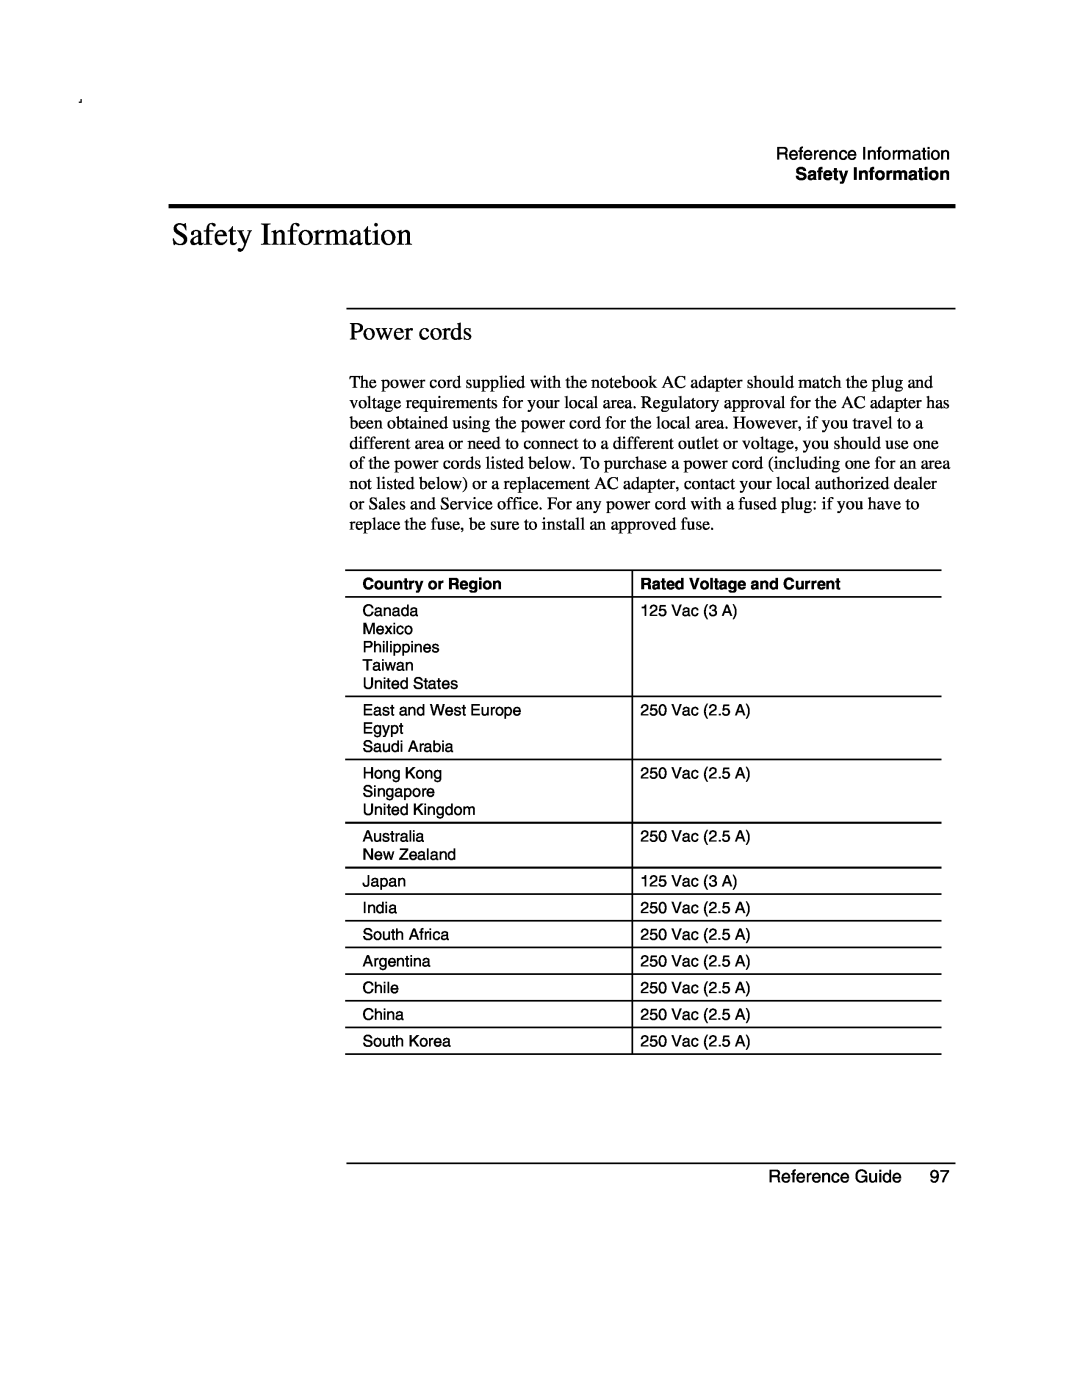 Compaq AMC20493-KT5 manual Safety Information, Power cords 